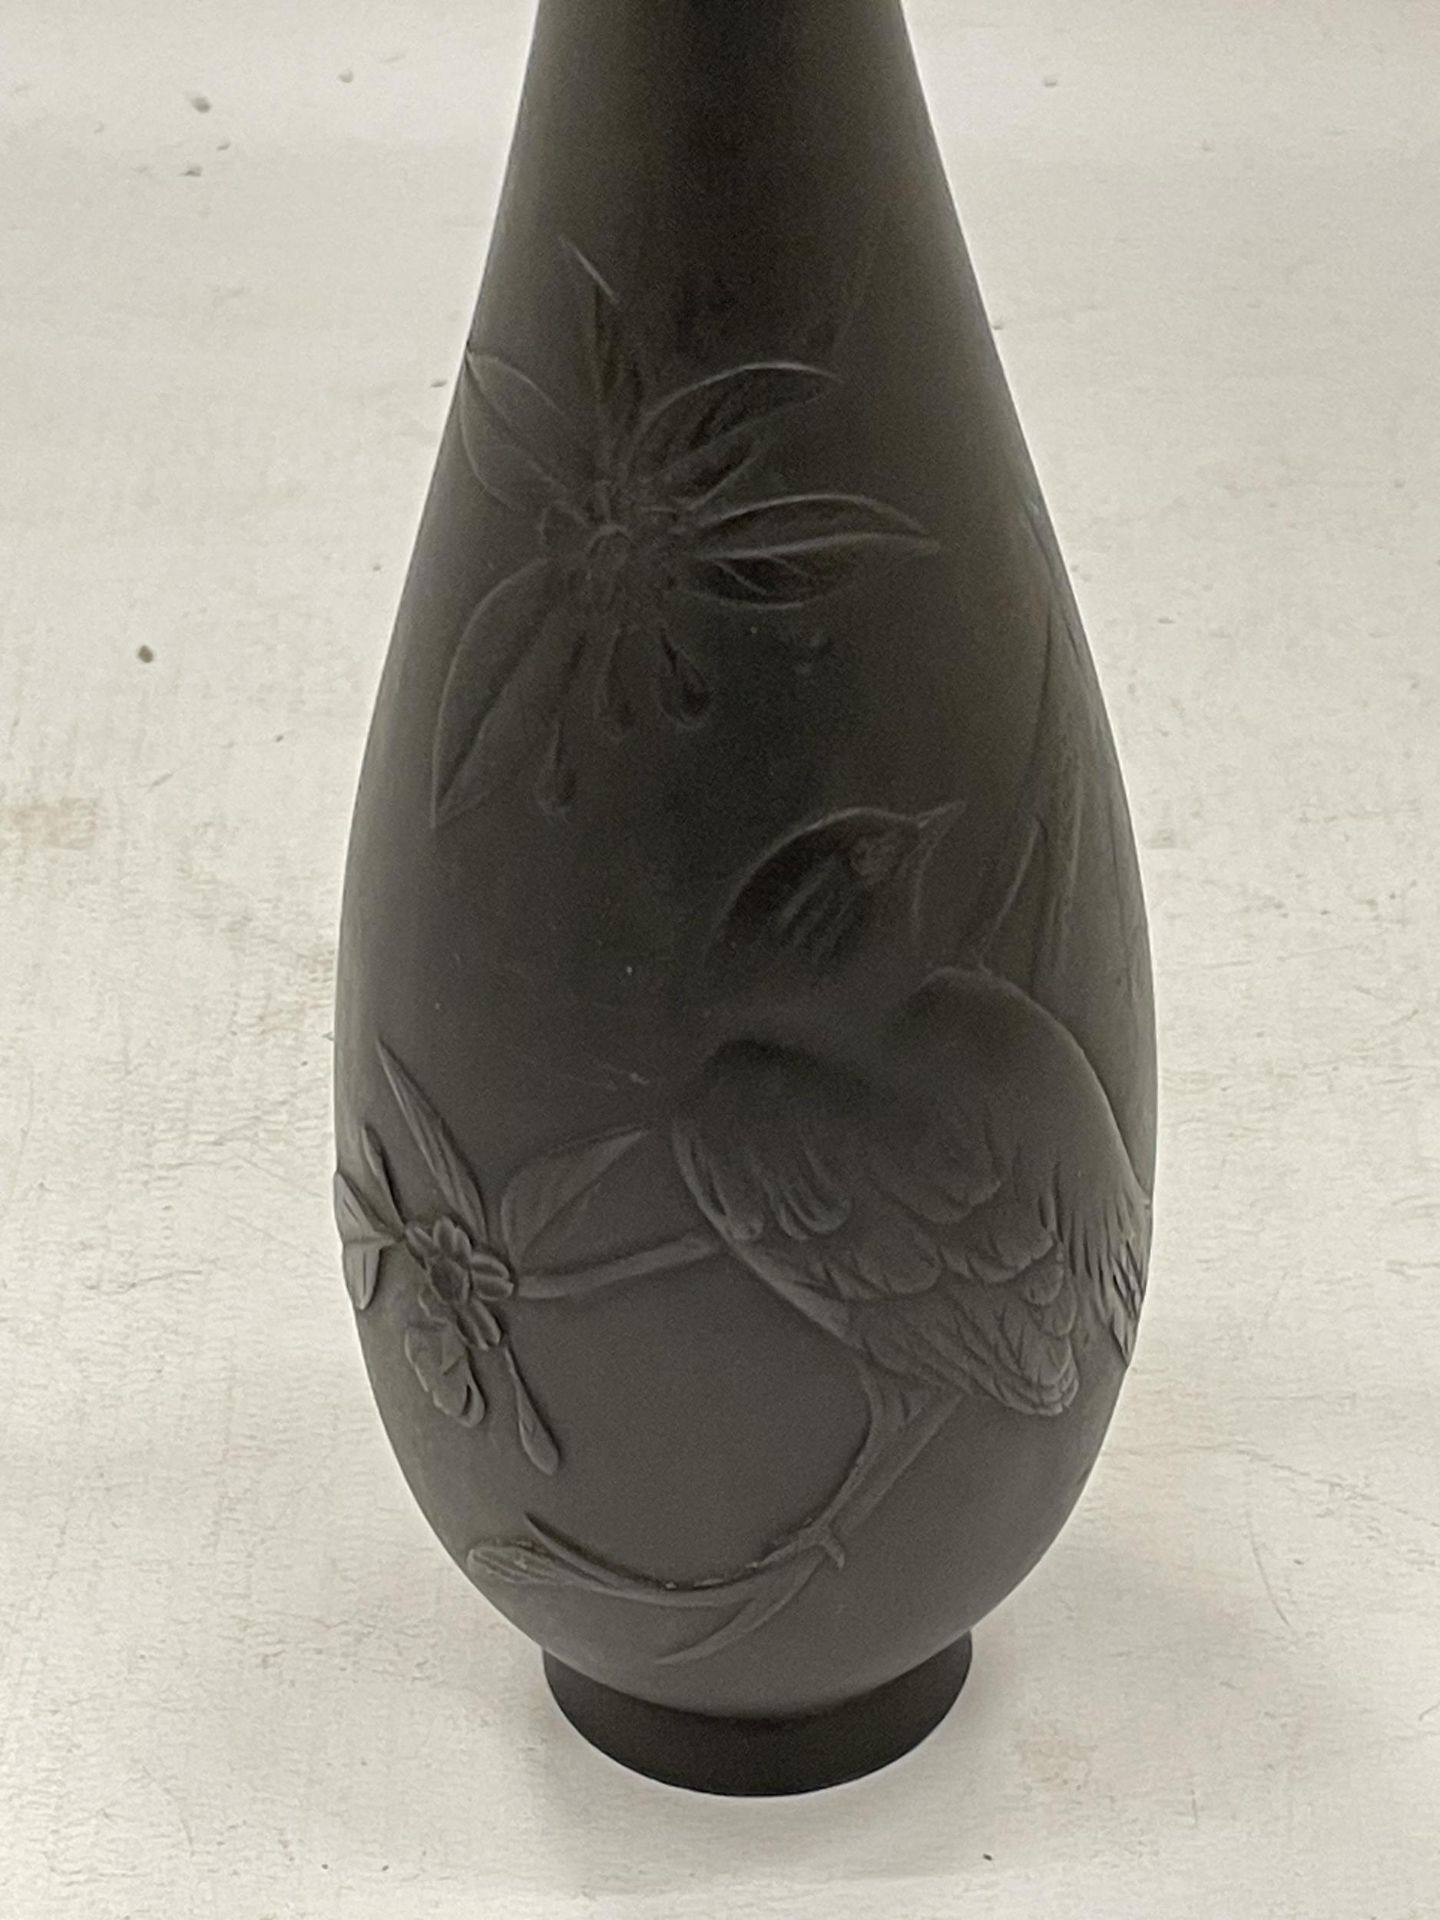 A TALL BRONZE ORIENTAL BOTTLE VASE WITH BIRD DESIGN, HEIGHT 29CM, (HOLLOW BASE) - Image 2 of 4